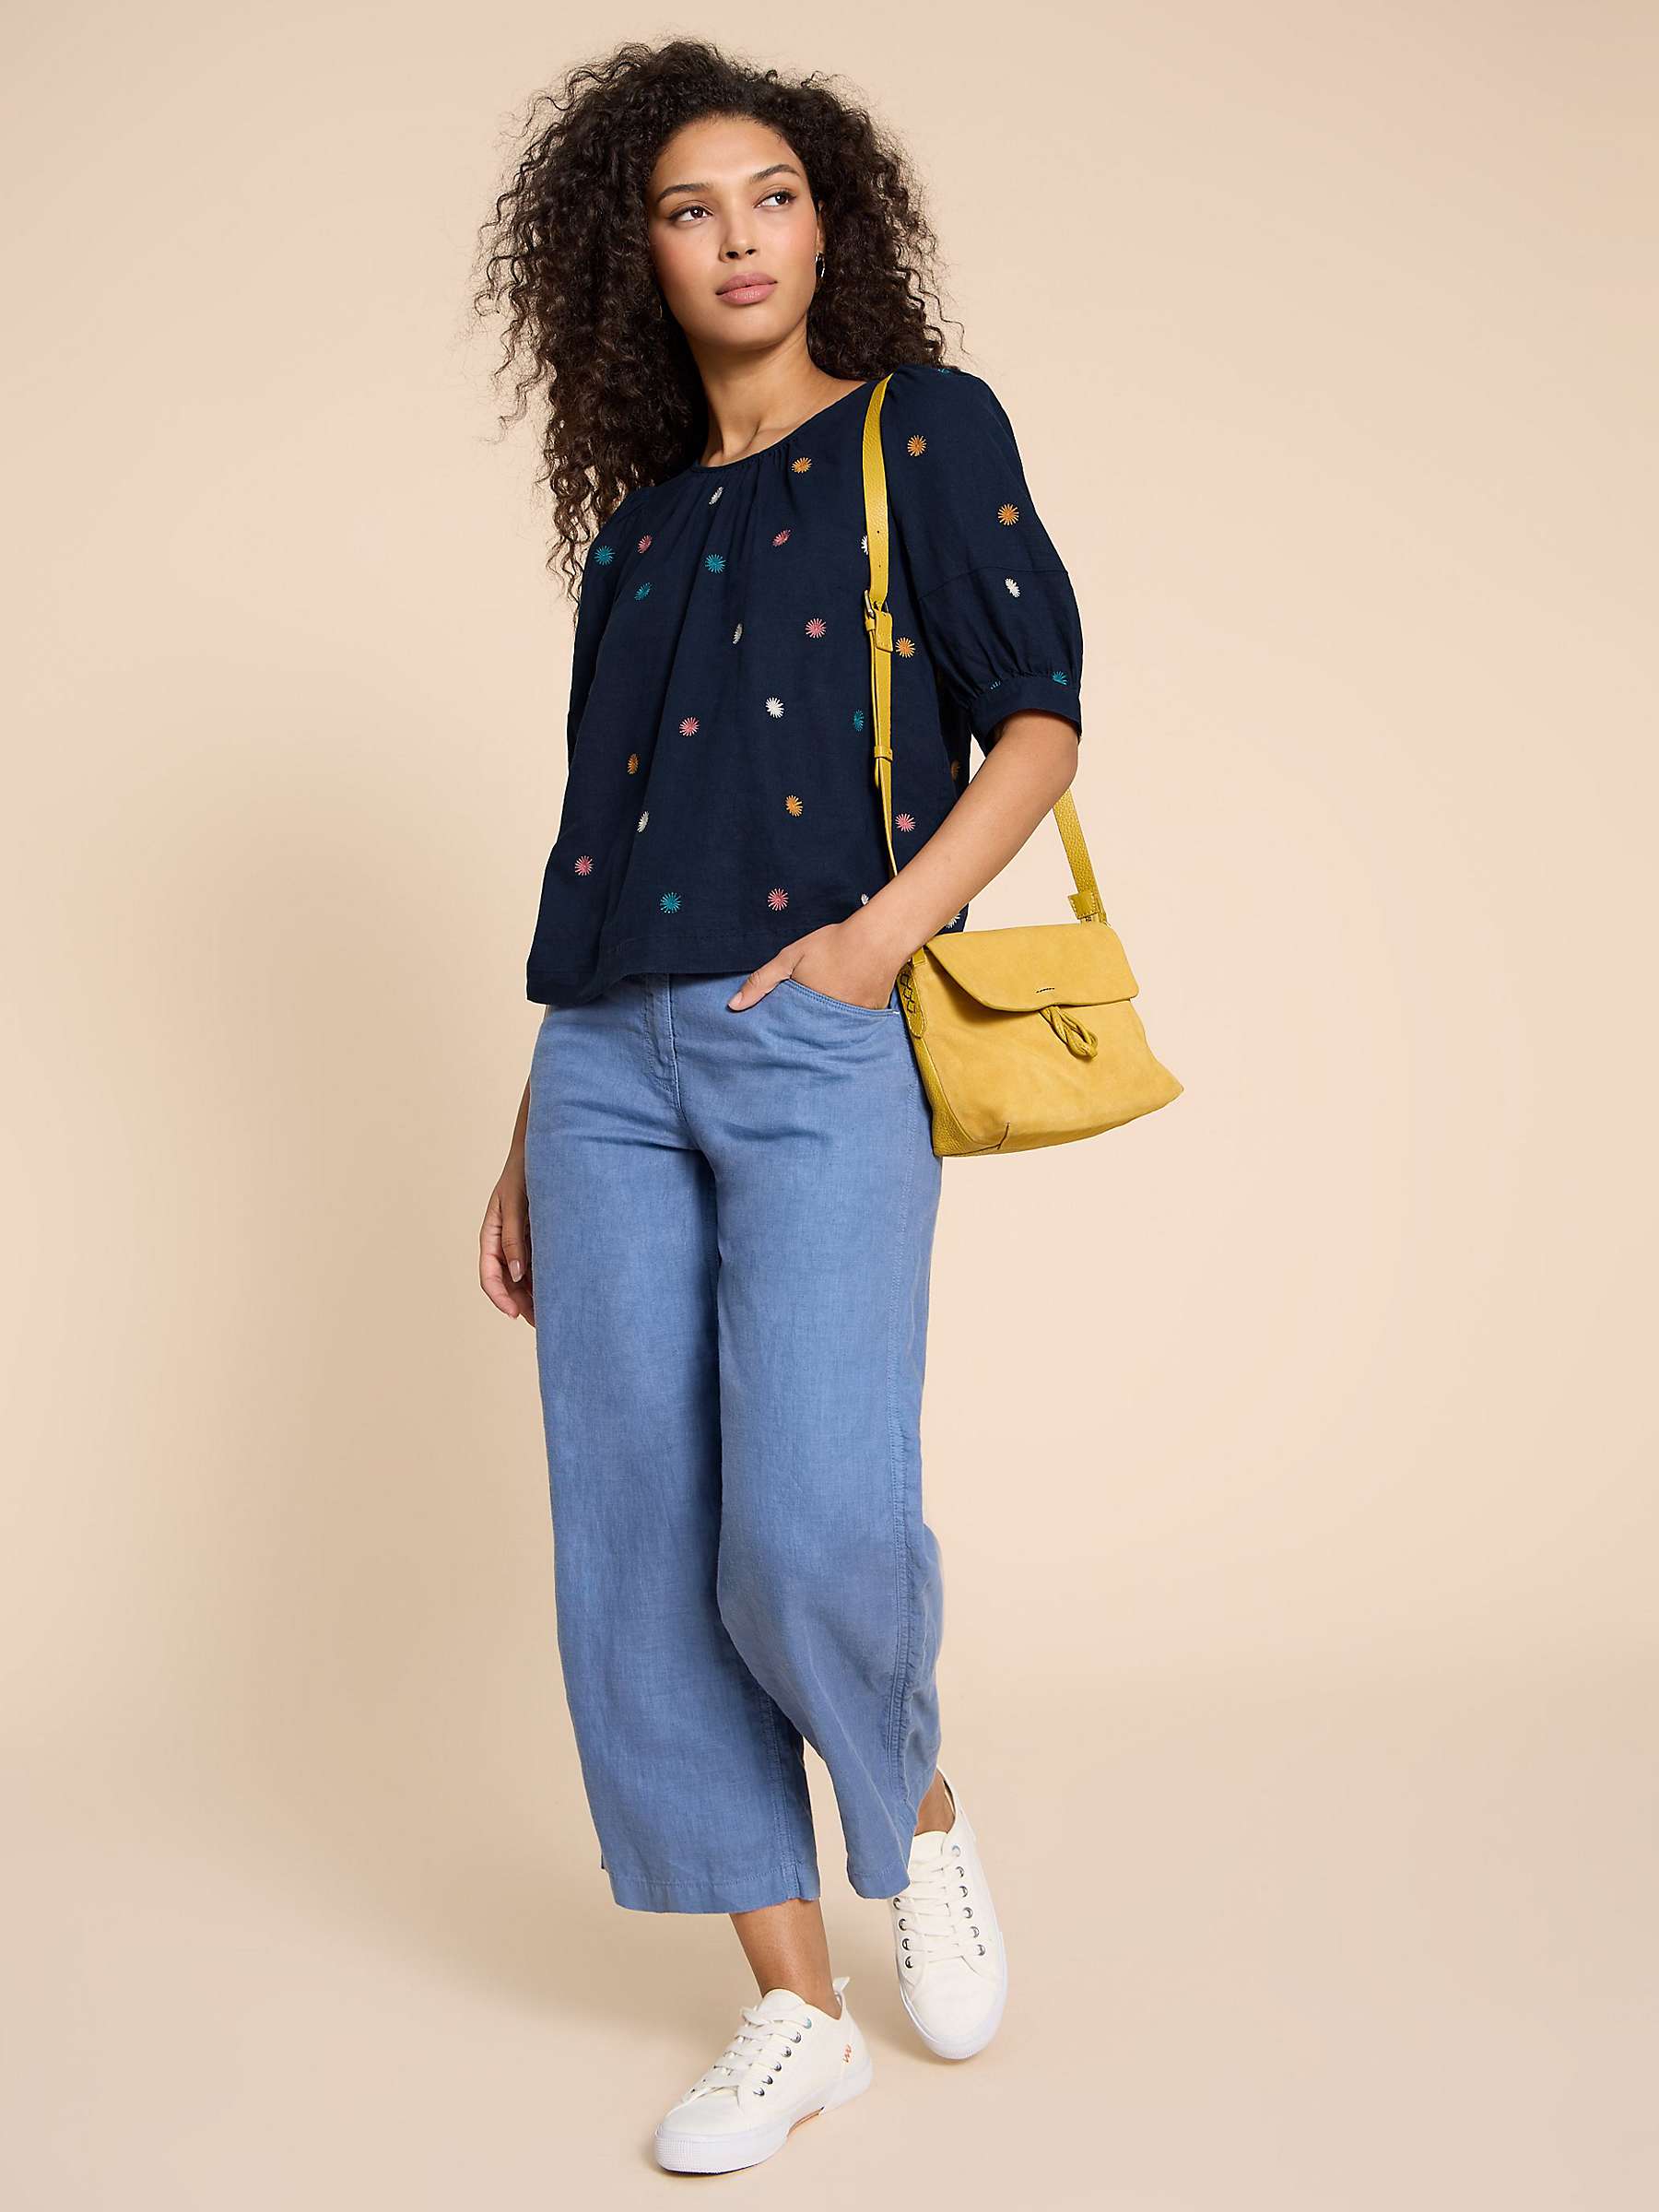 Buy White Stuff Shelly Floral Stitch Linen Blend Top, Navy/Multi Online at johnlewis.com